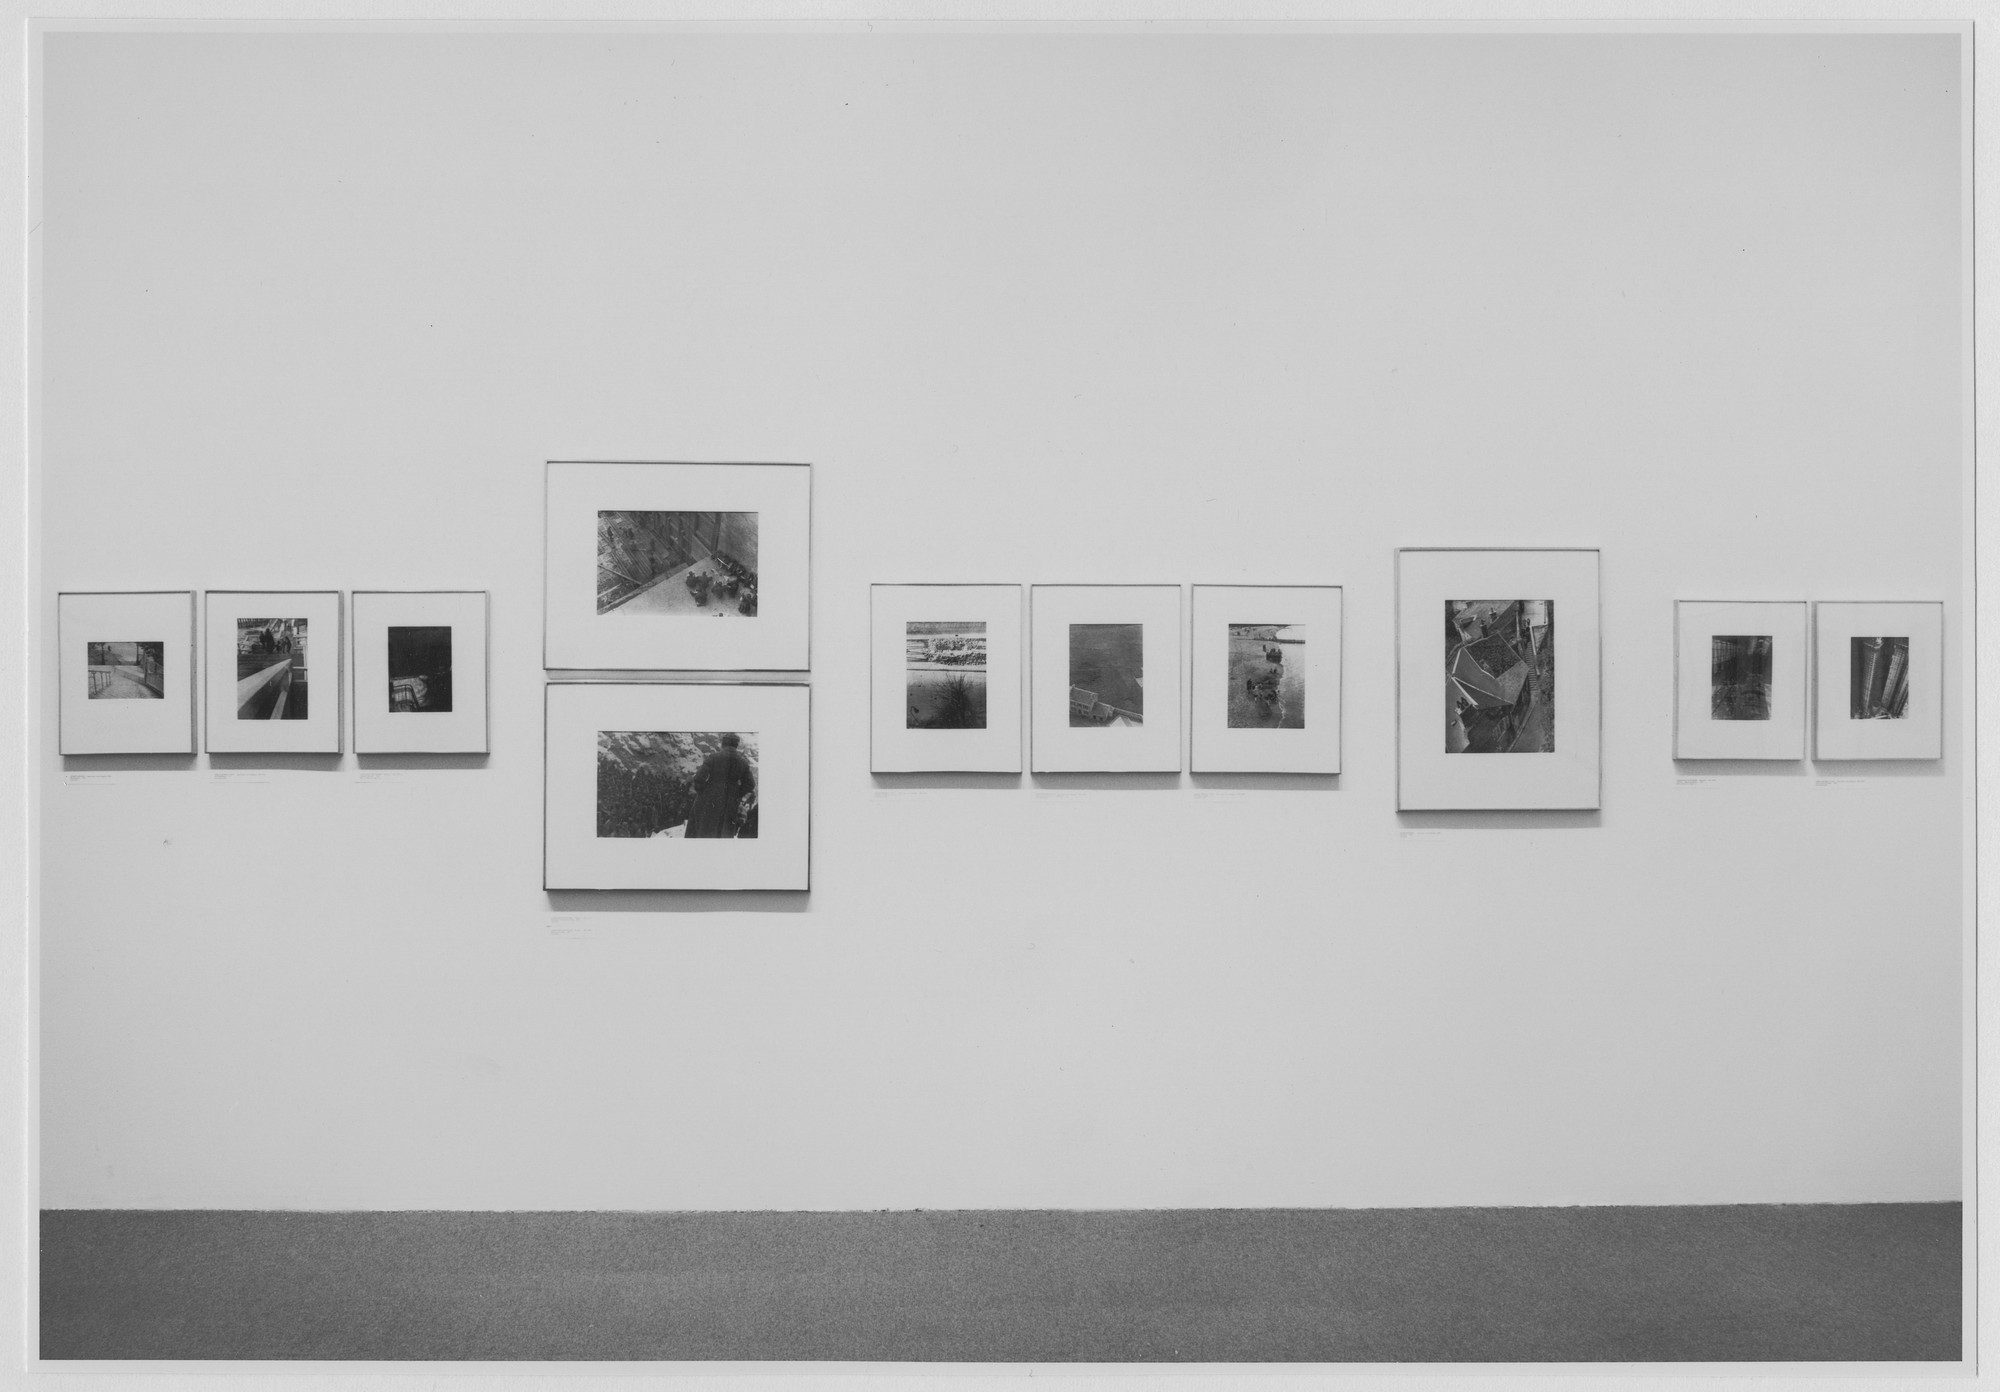 Kertész, Rodchenko, and Moholy-Nagy: Photographs from the Collection | MoMA